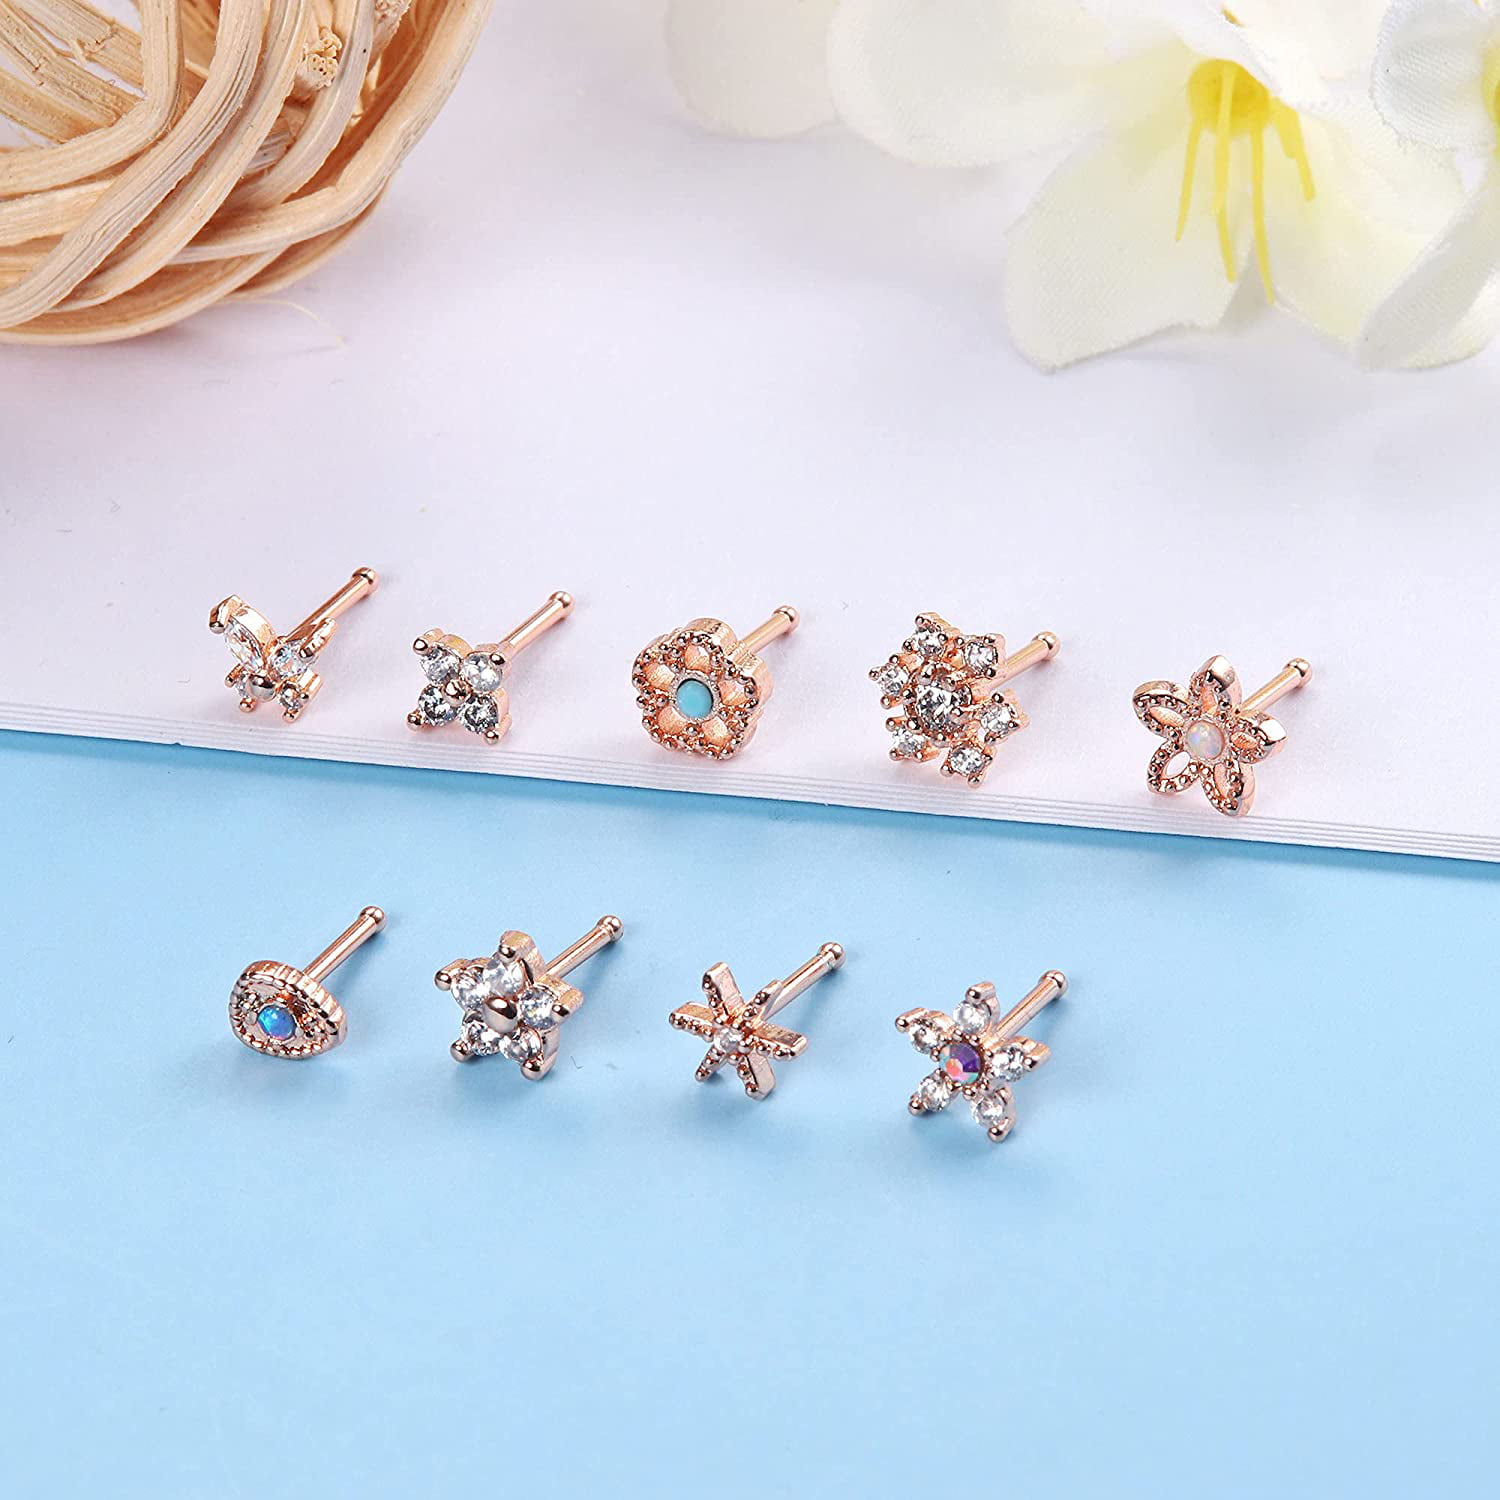 THUNARAZ 20G Surgical Steel Nose Ring Studs for Women Flower/Butterfly/Snowflake Opal CZ Nose Piercing L-Shape Screw Bone Nostril Piercing Jewelry 